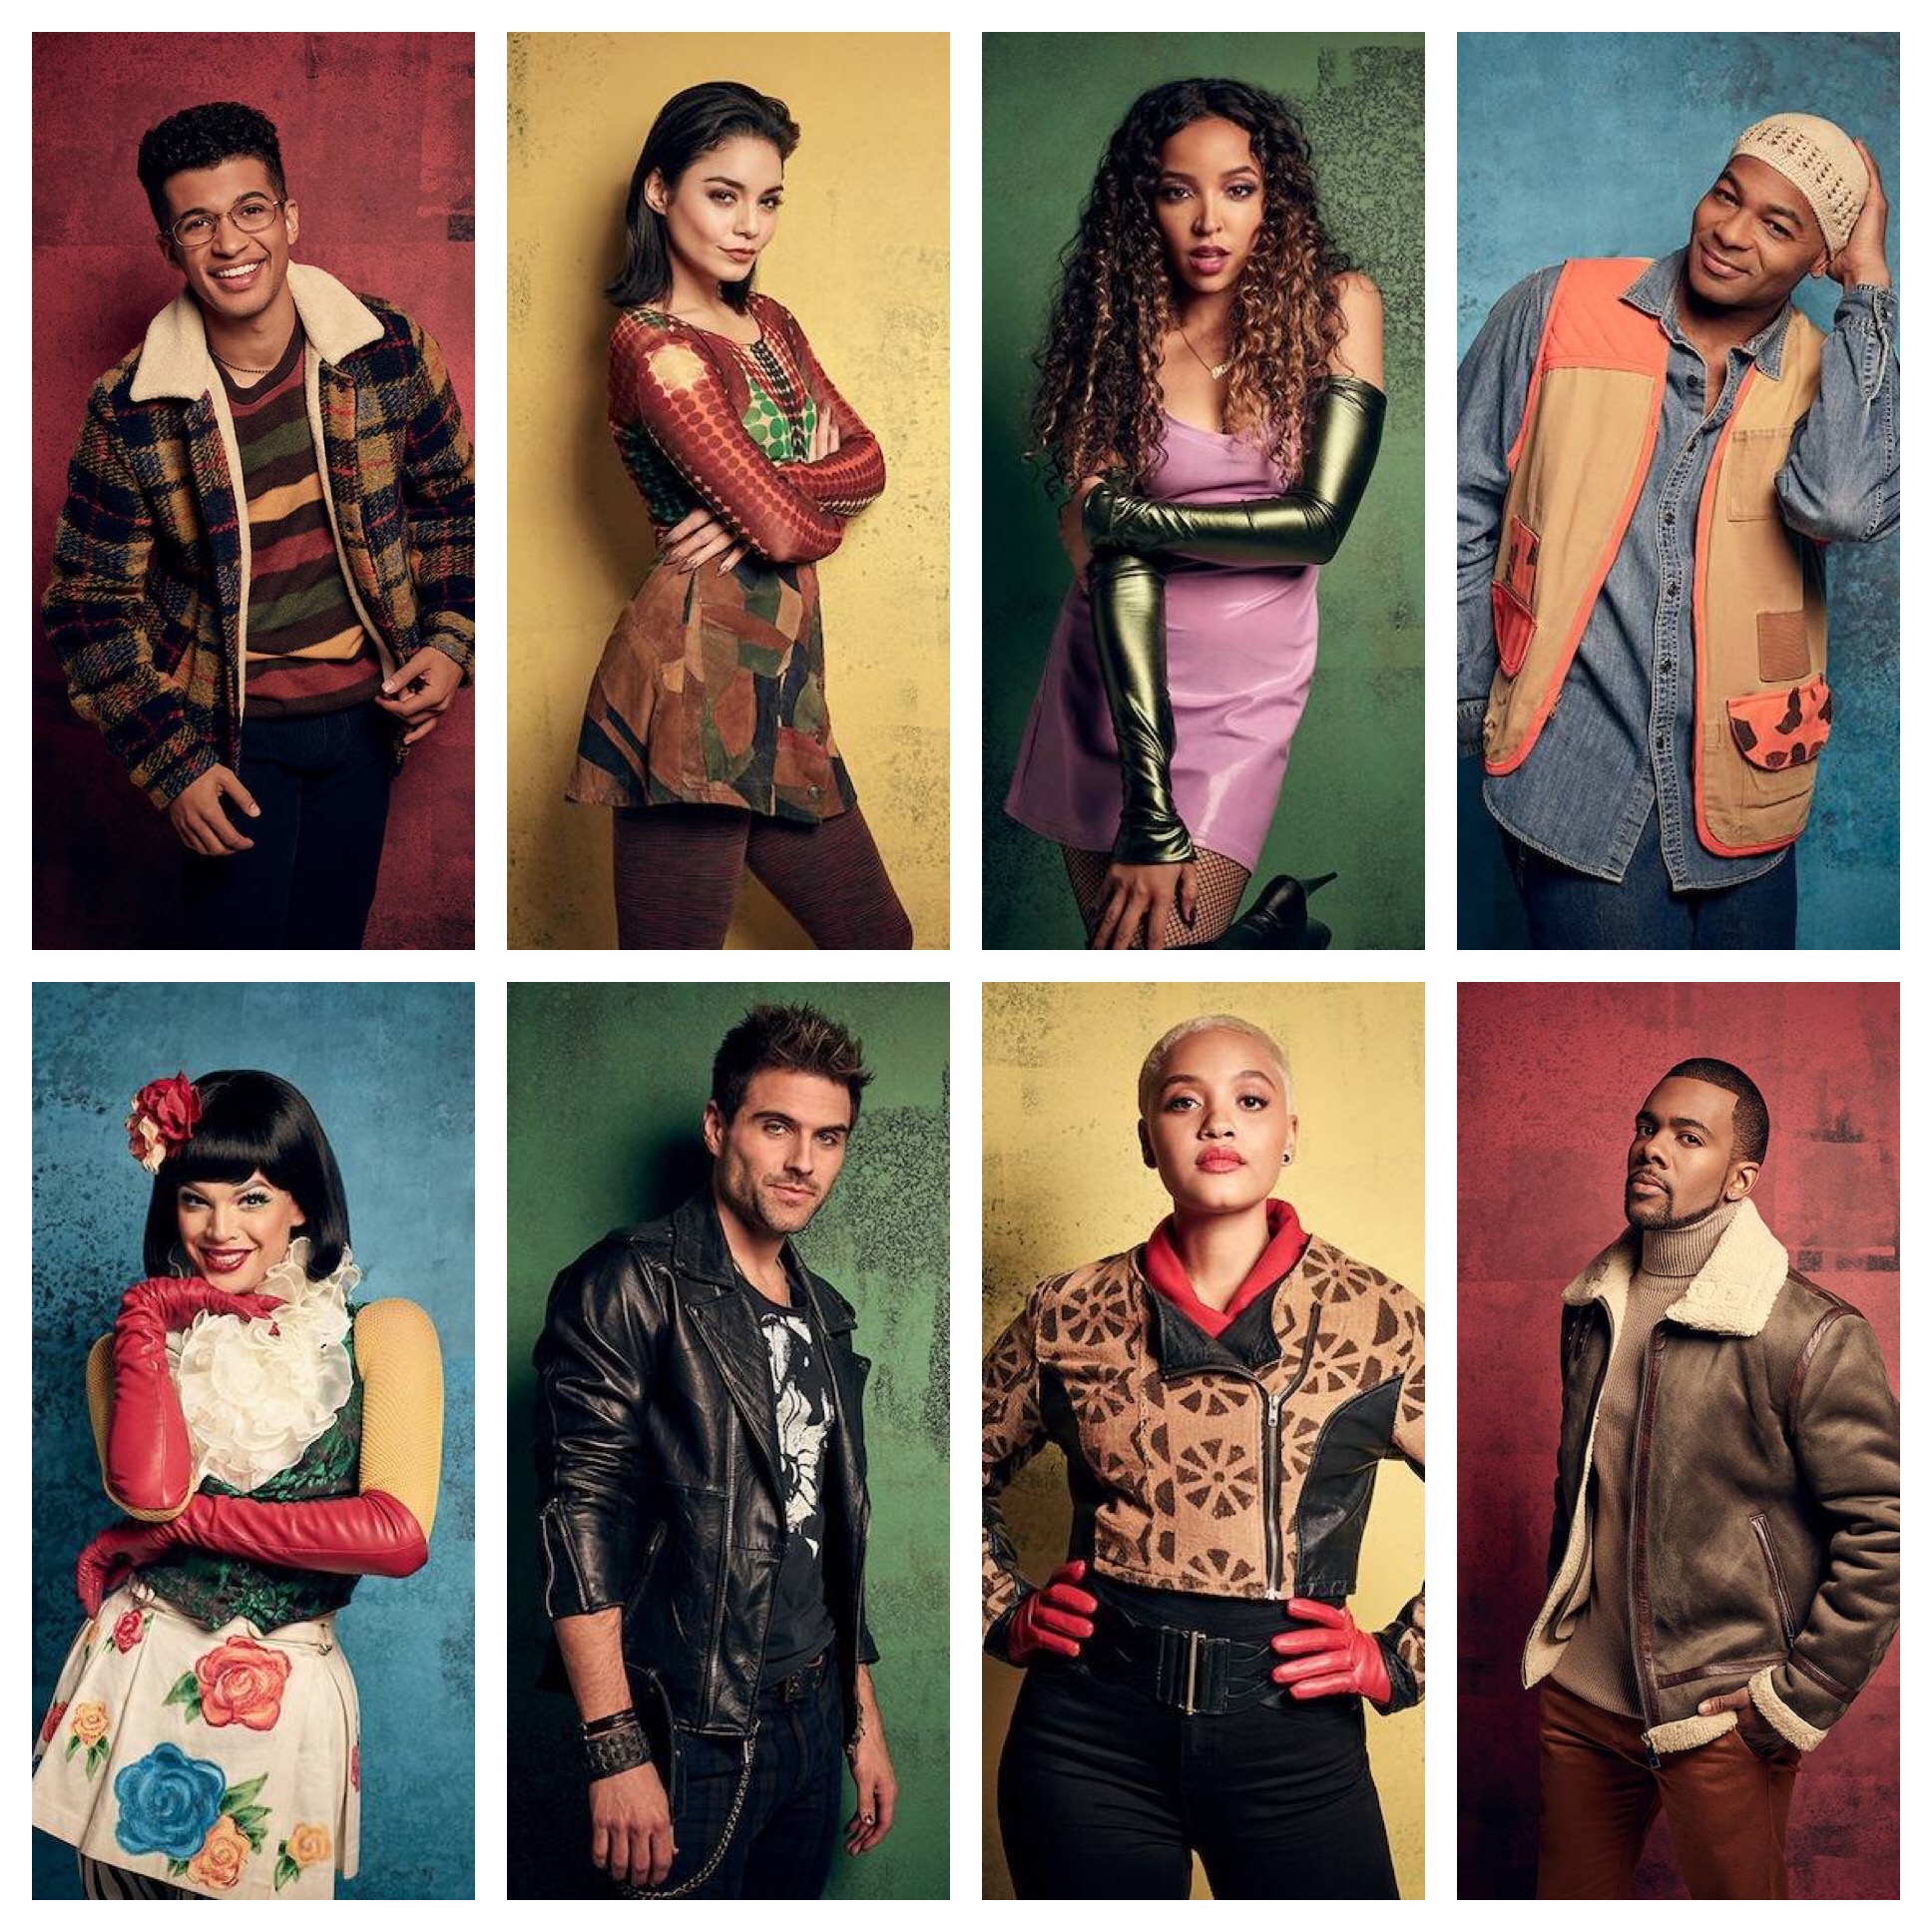 The Cast of RENT Live!